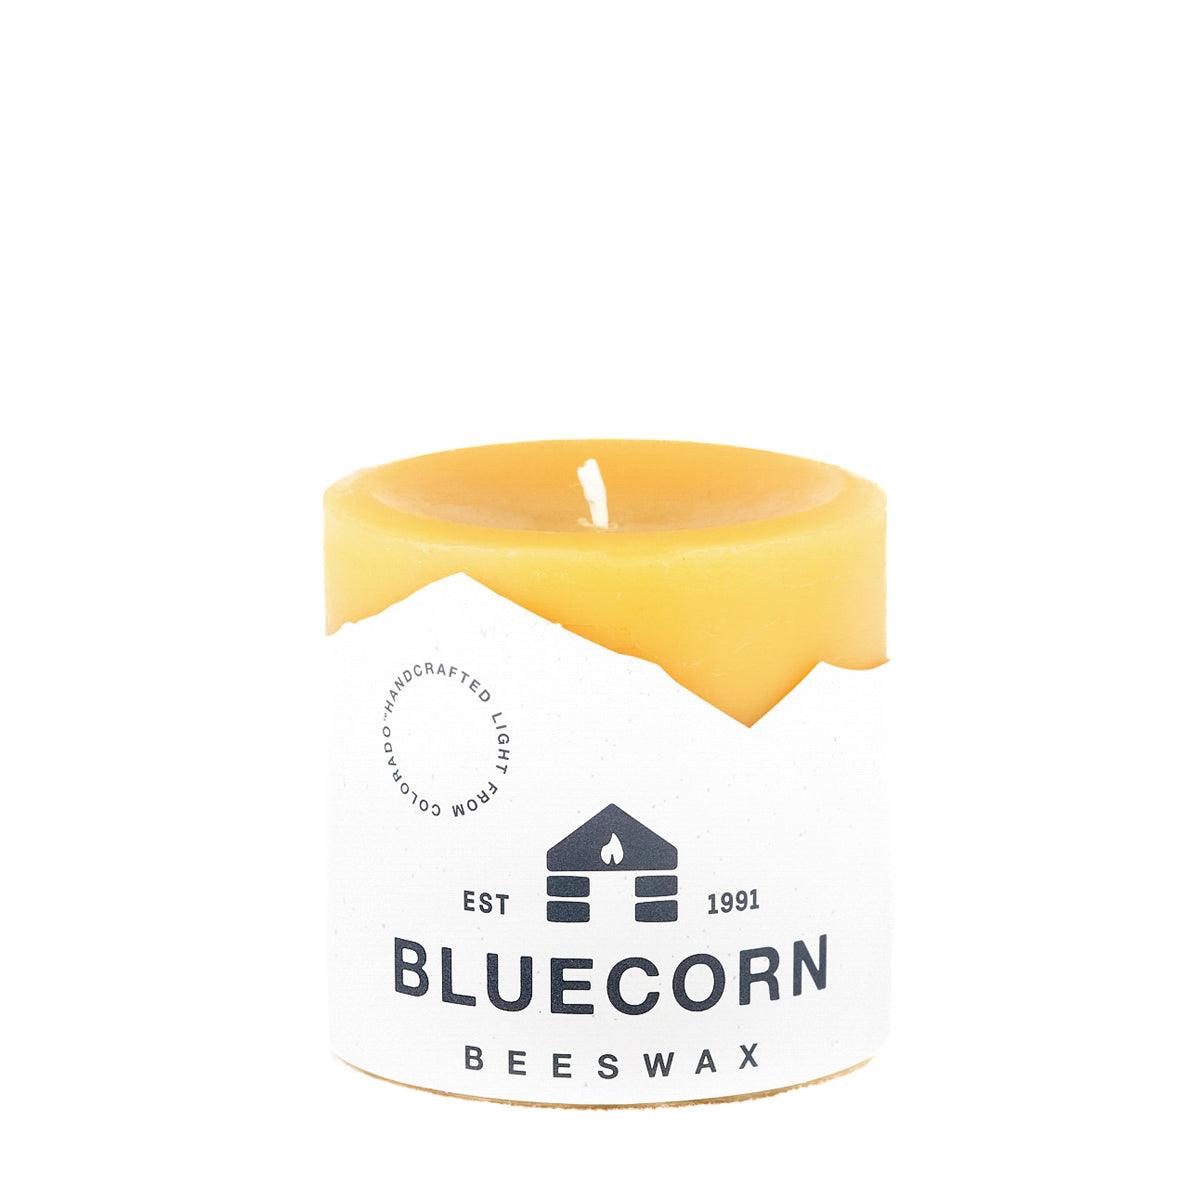 Bluecorn Beeswax 100% Pure Beeswax 3" x 3" Raw Pillar Candle. Burn Time: 50 hours. Made with 100% Pure Beeswax, wax is golden in color with a light honey scent. Made with 100% pure cotton wick, no lead and paraffin free. Clean burning and non-toxic. Features Bluecorn Beeswax label printed on 100% recycled paper. Clearance items might have an odd blemish or air bubble, but will still burn beautifully.